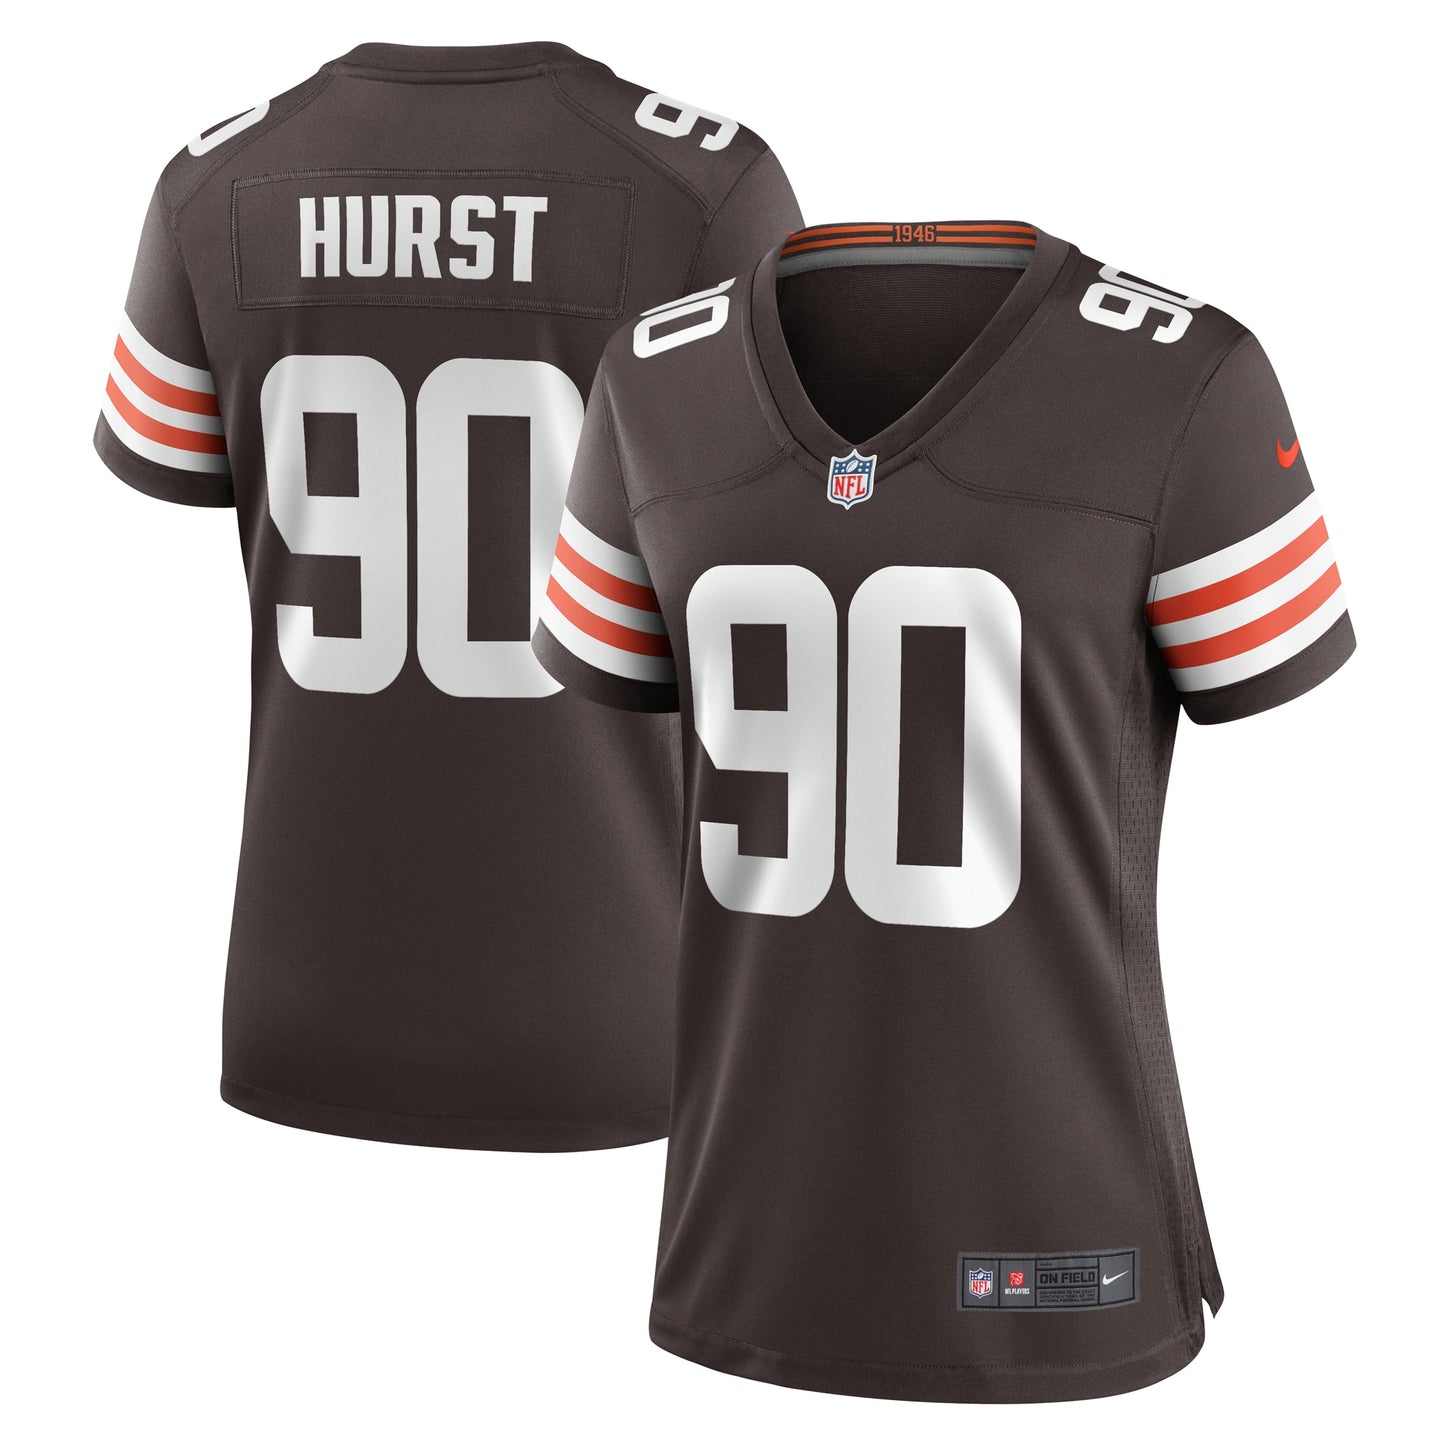 Maurice Hurst Cleveland Browns Nike Women's Nike Women's All Player Jersey - Brown